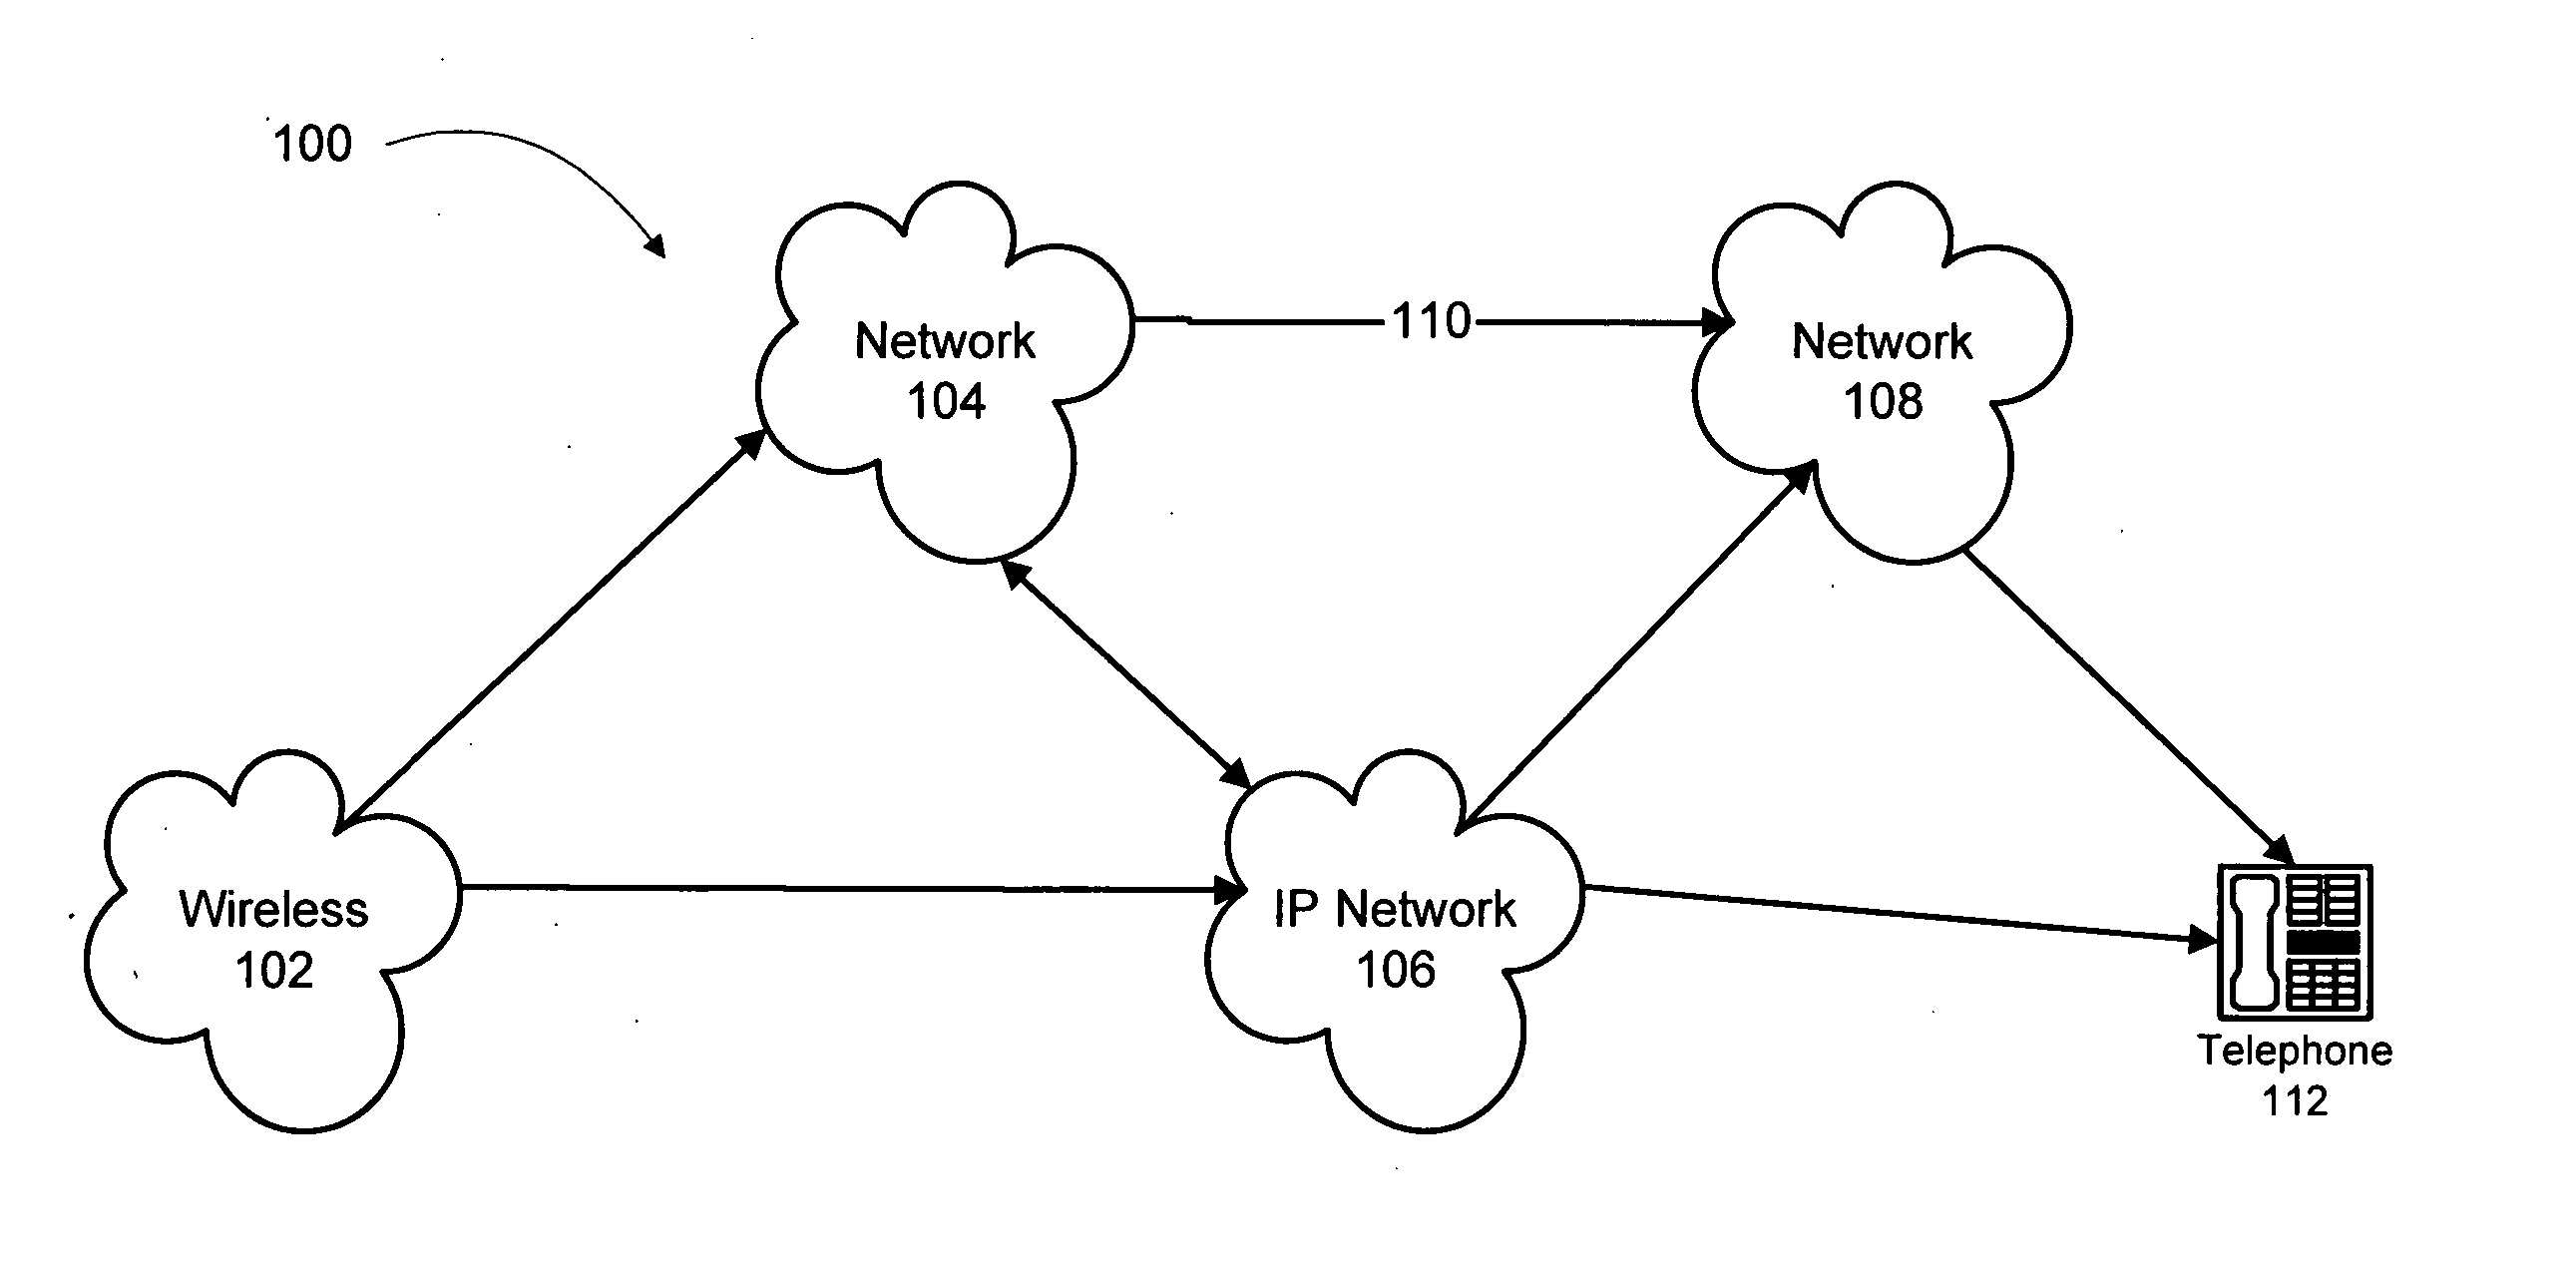 System and method for providing intercept of international calls to reroute the call from the default international routing